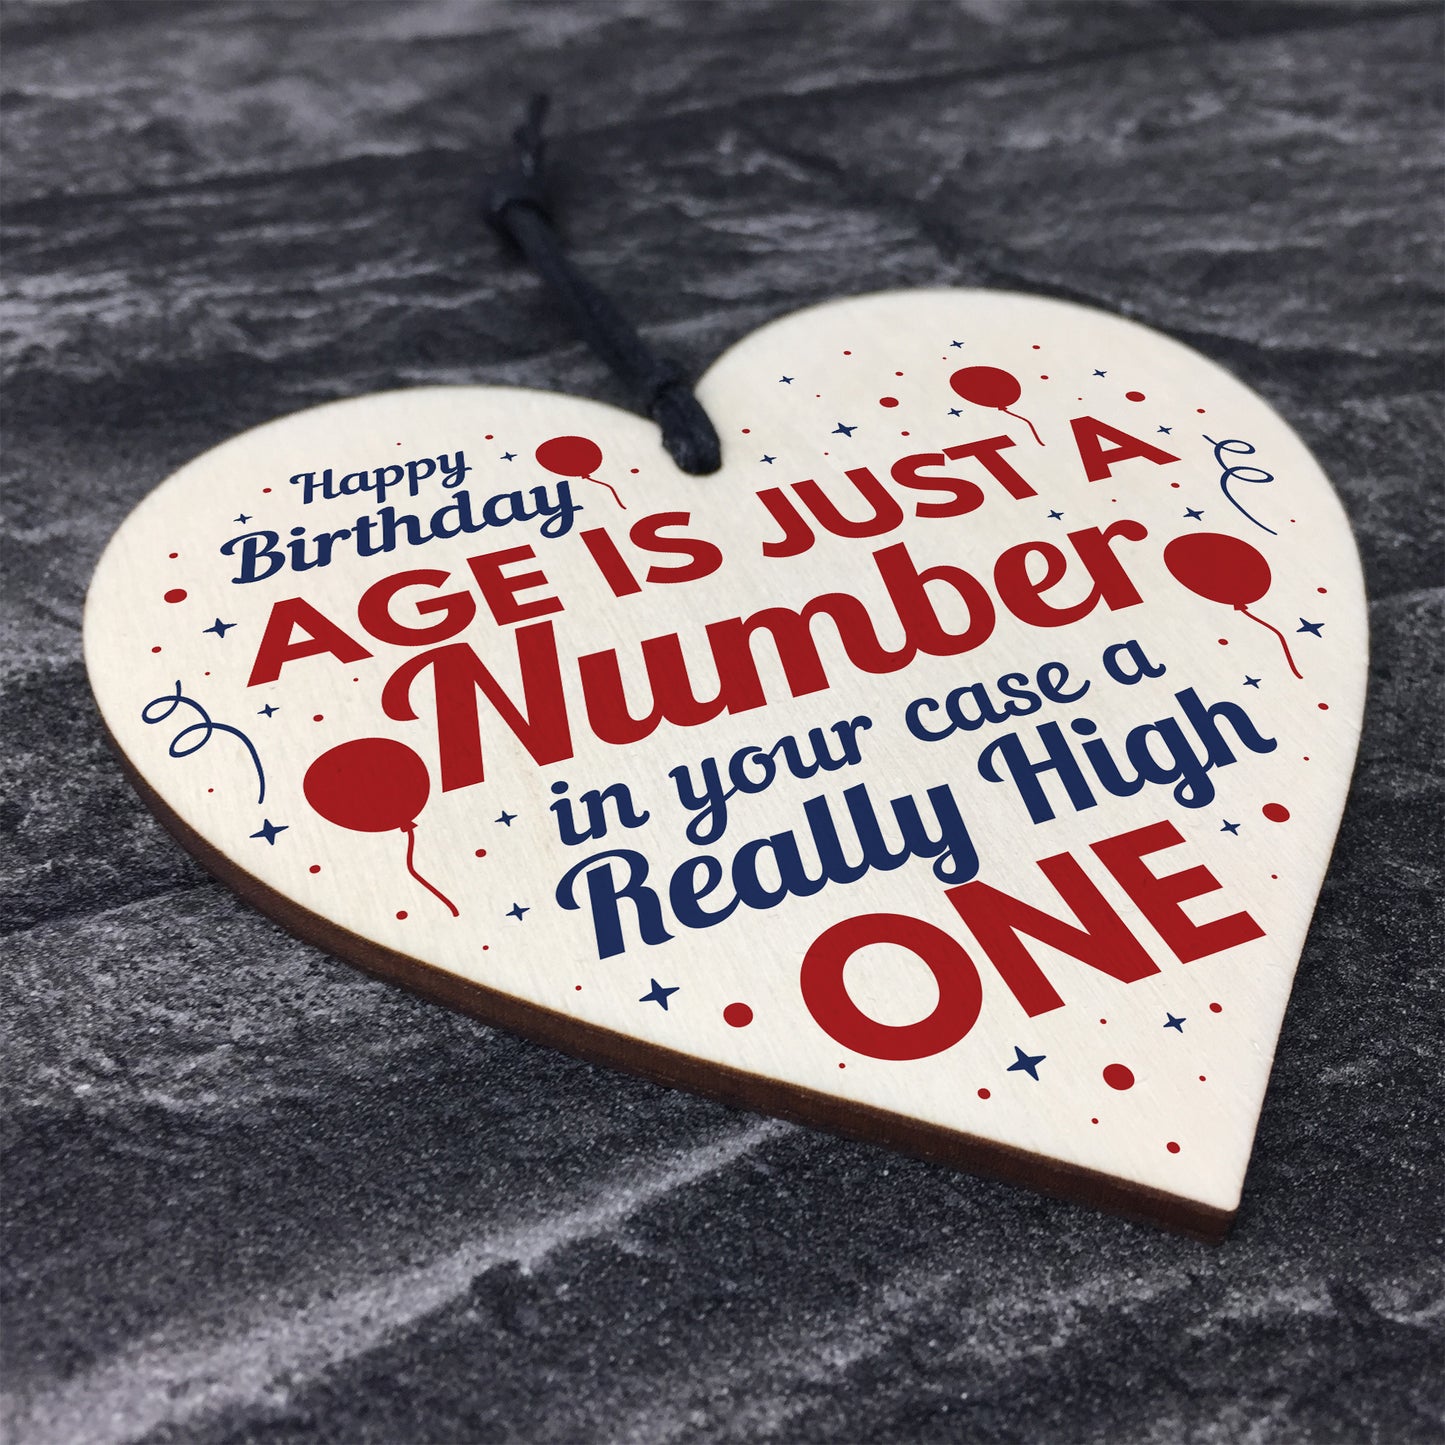 30th 40th 50th 60th Birthday Gifts For Men Women Wood Heart Sign